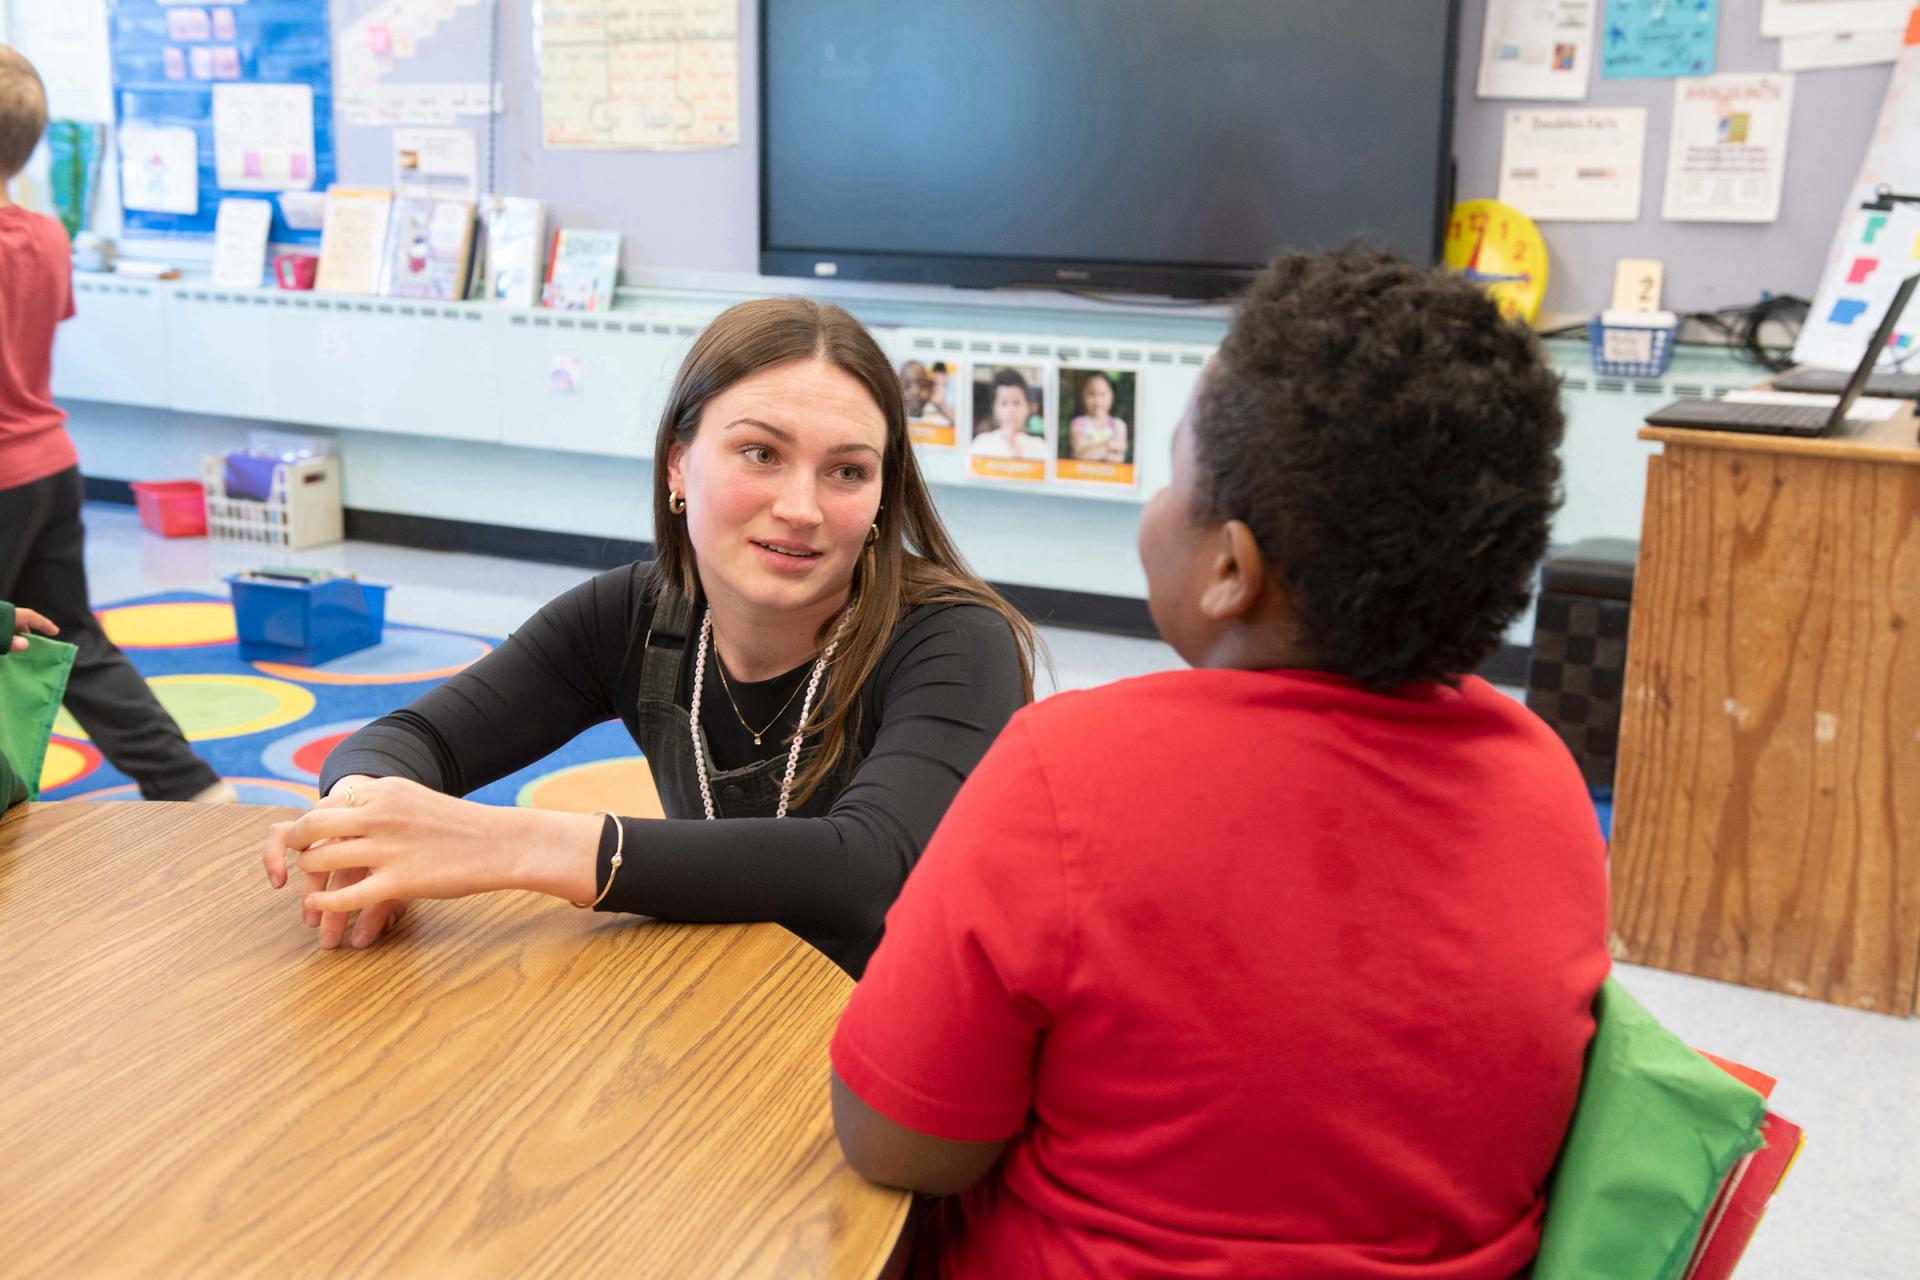 Ella McCarthy engaging with a young student during her student teaching internship.